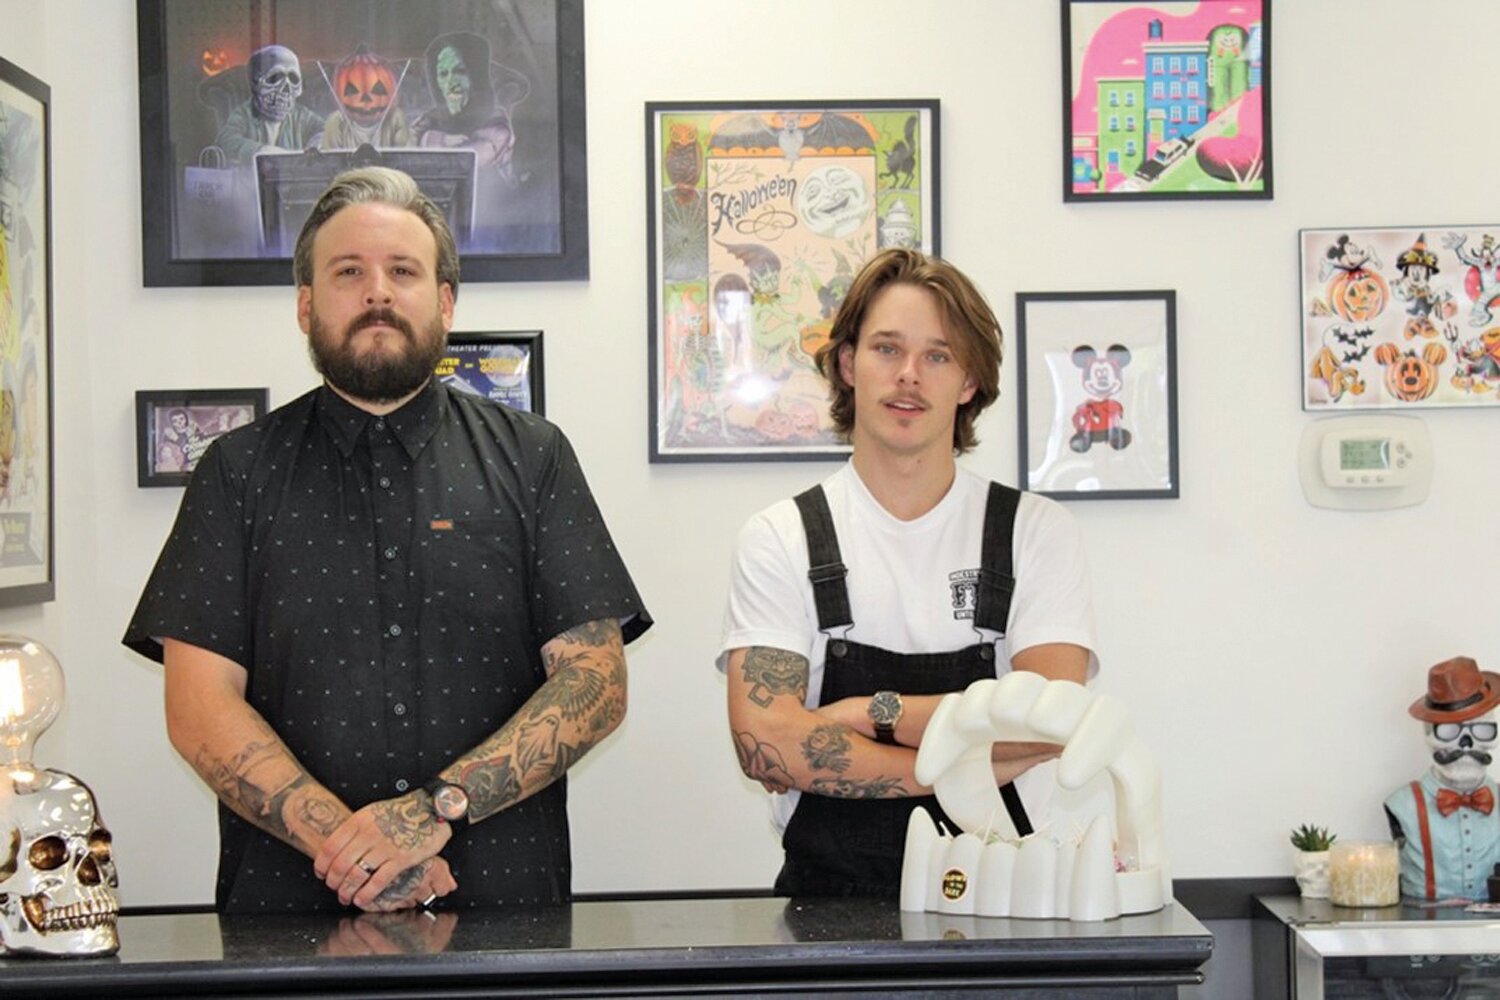 Diehl Mollica and Luke Pomper stand behind the counter of Happily Haunted Barbershop.